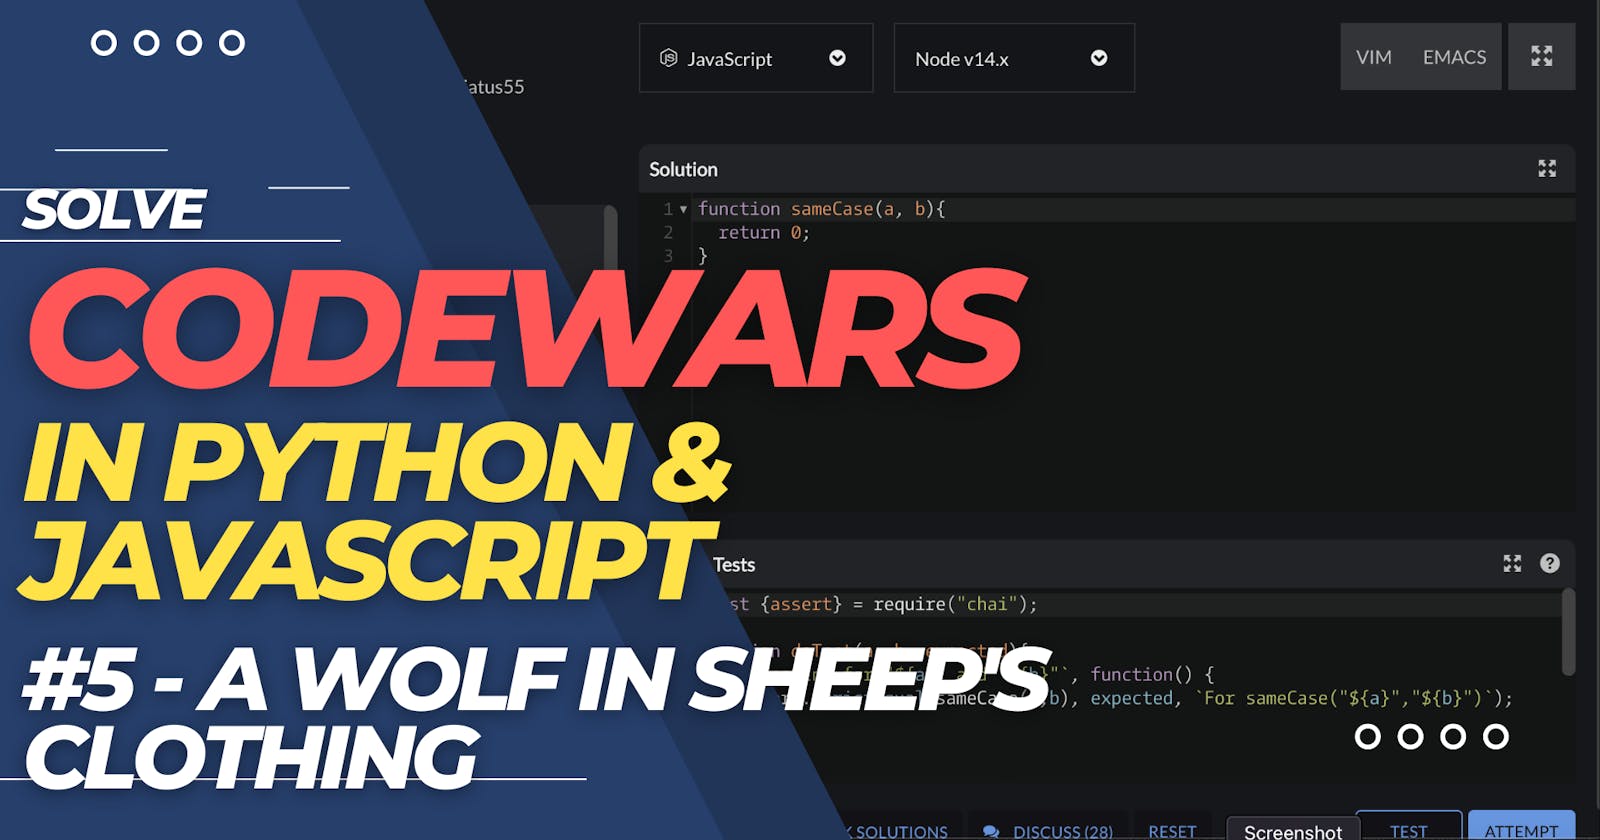 CODEWARS #5 - A wolf in sheep's clothing (solved in Python & Javascript)